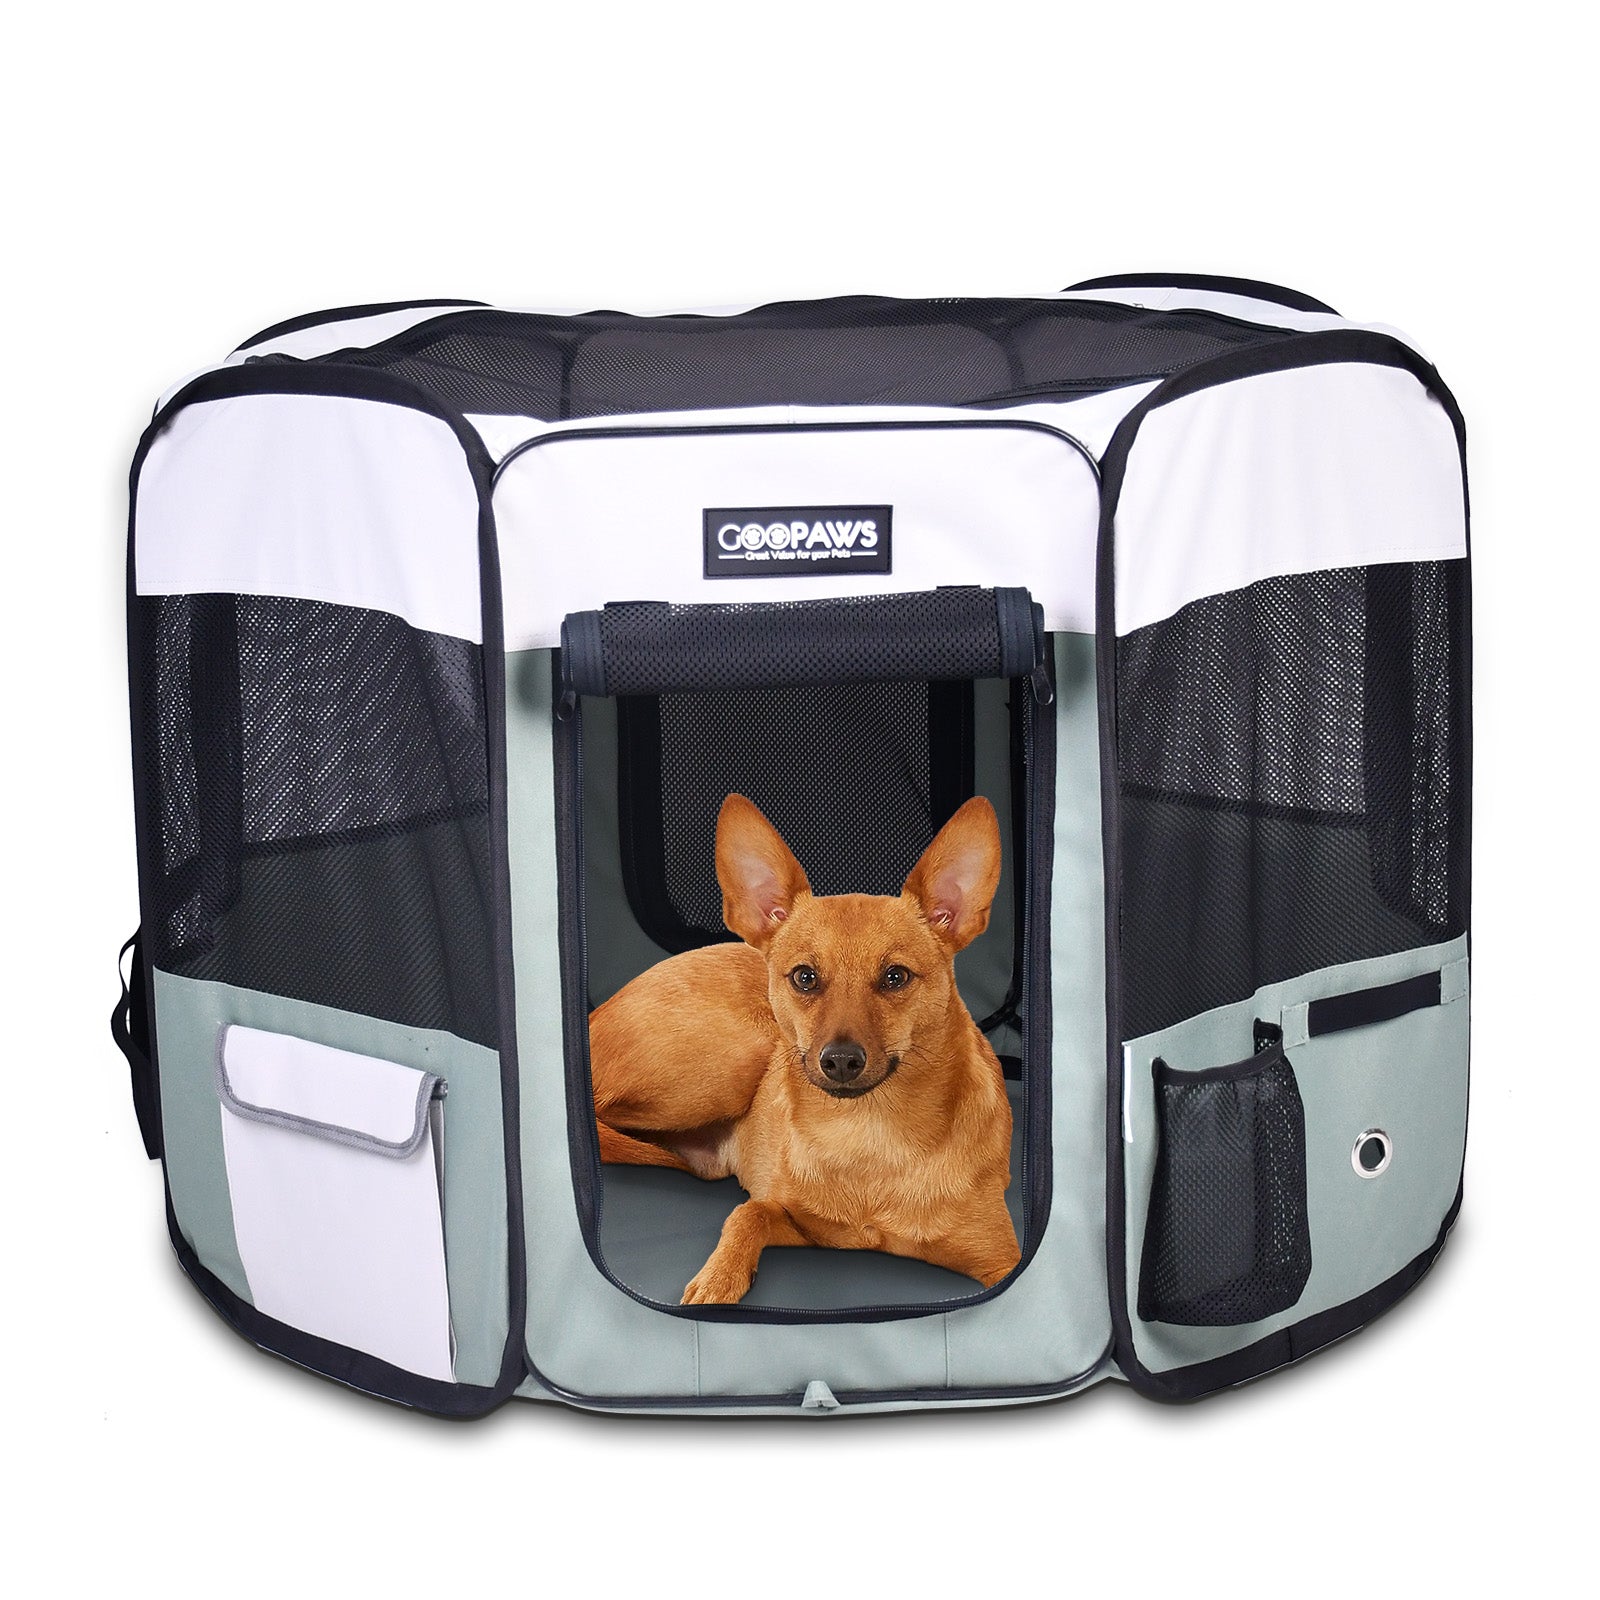 Jespet 2-Door Portable Soft-Sided Dog, Cat & Small Pet Exercise Playpen, Green, 36''